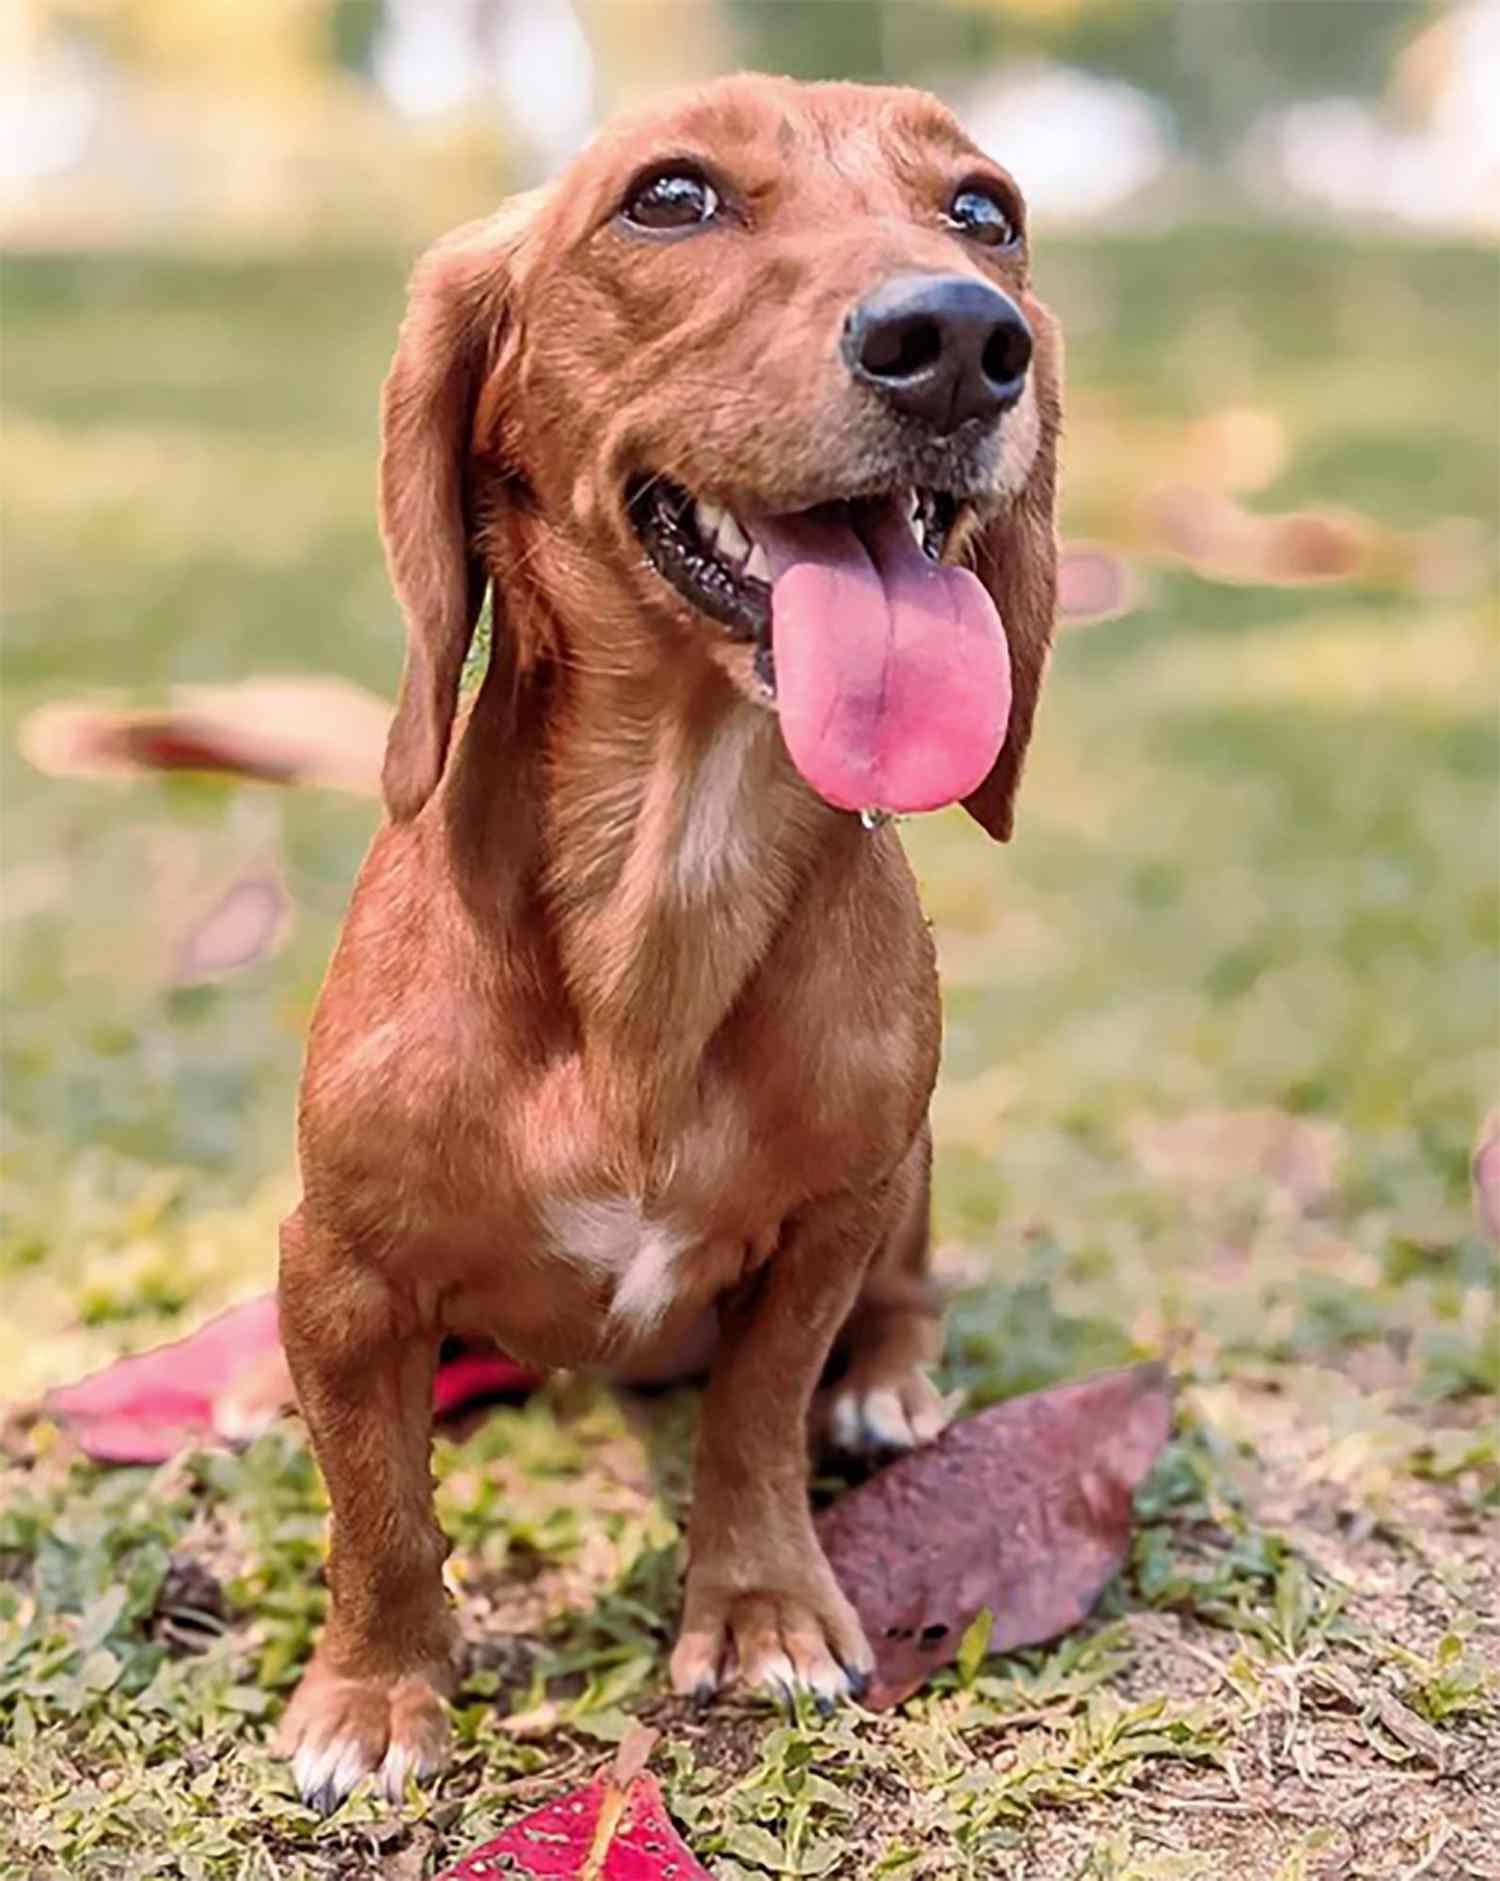 brown beagle dachshund mix with a dachshund body standing with its tongue out